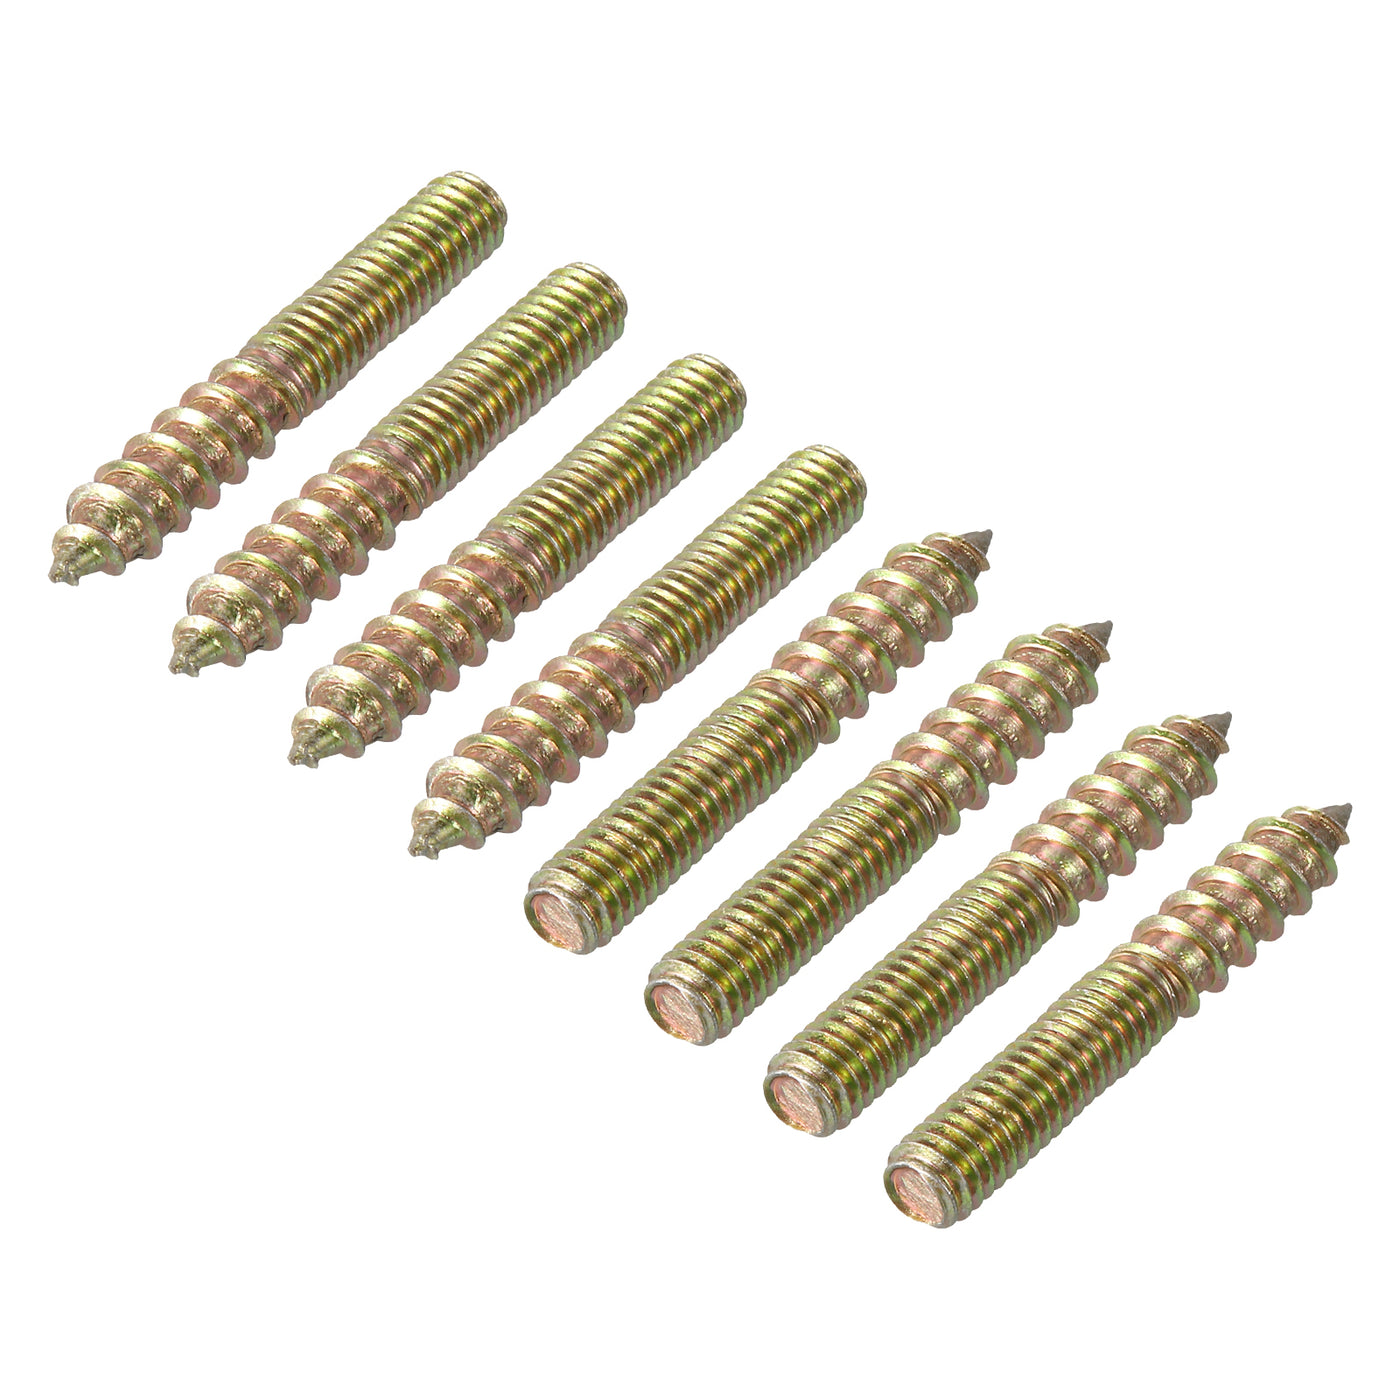 uxcell Uxcell 40Pcs M6x40mm Hanger Bolt Double Headed Bolt Self-Tapping Screw for Furniture